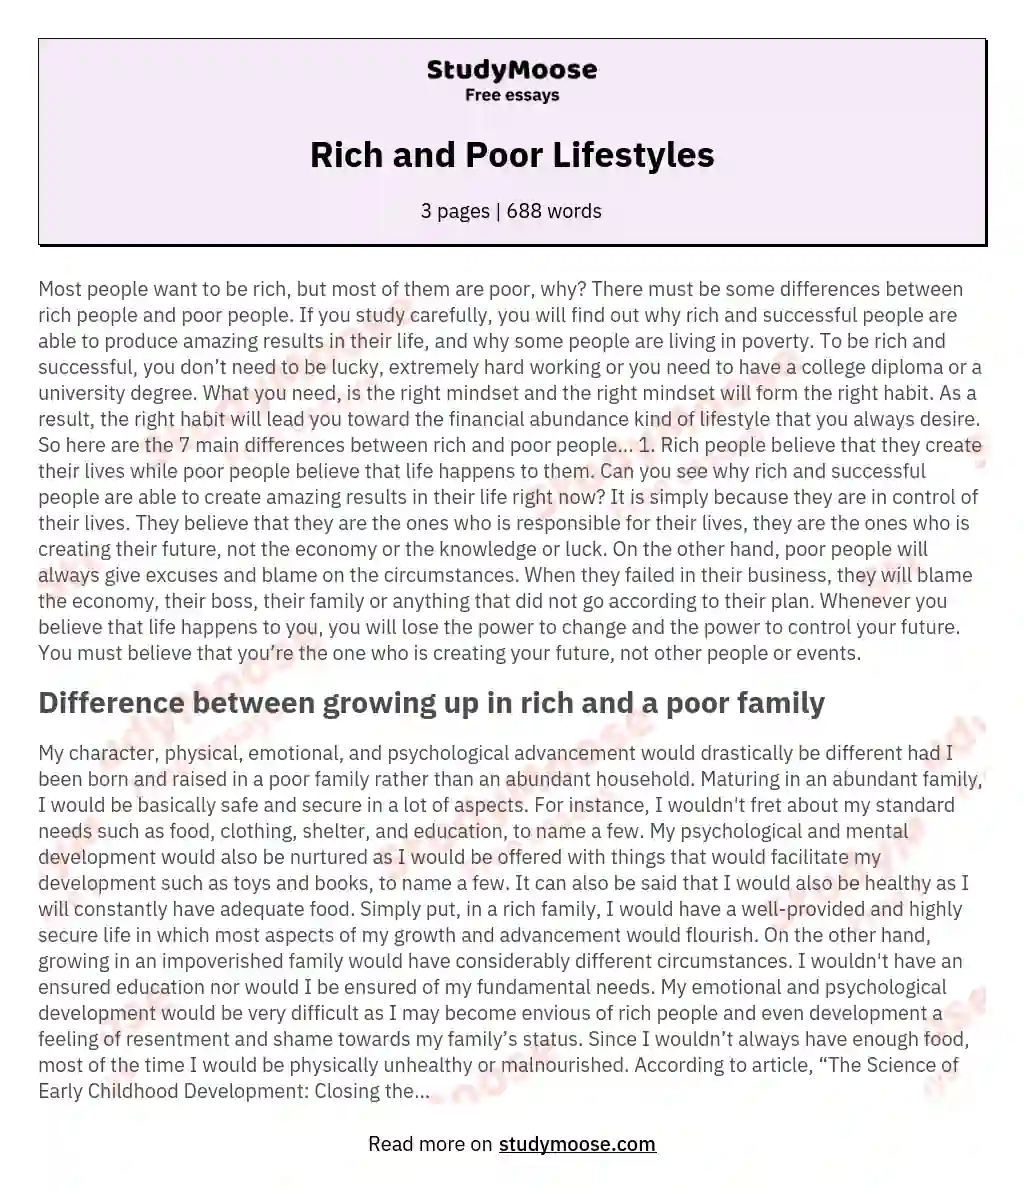 Rich and Poor Lifestyles